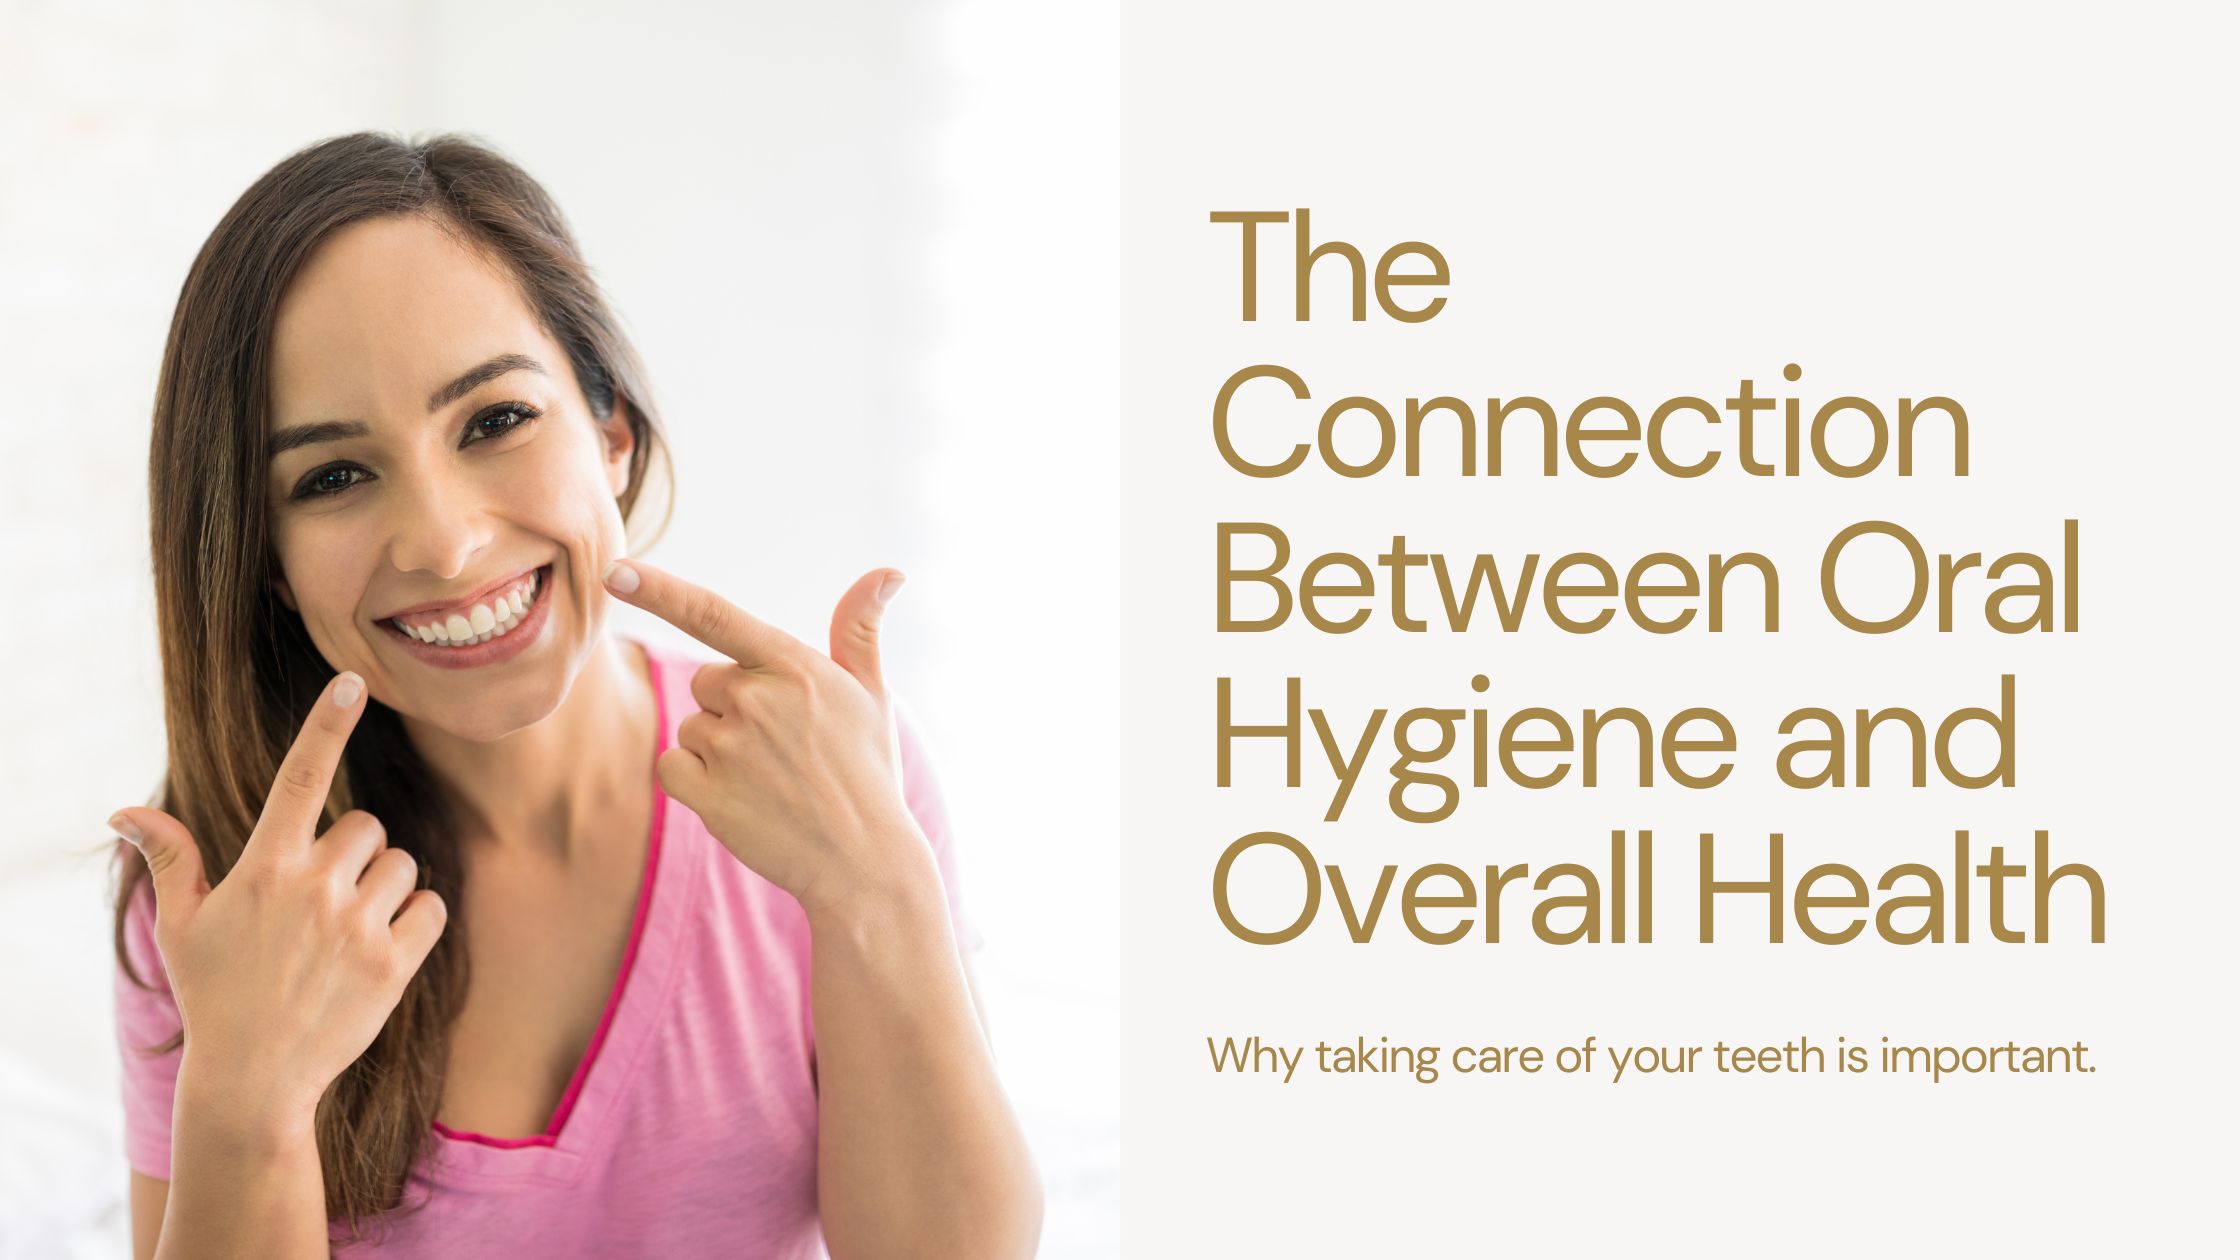 woman pointing to her smile background with "The Connection Between Oral Hygiene and Oral Health"